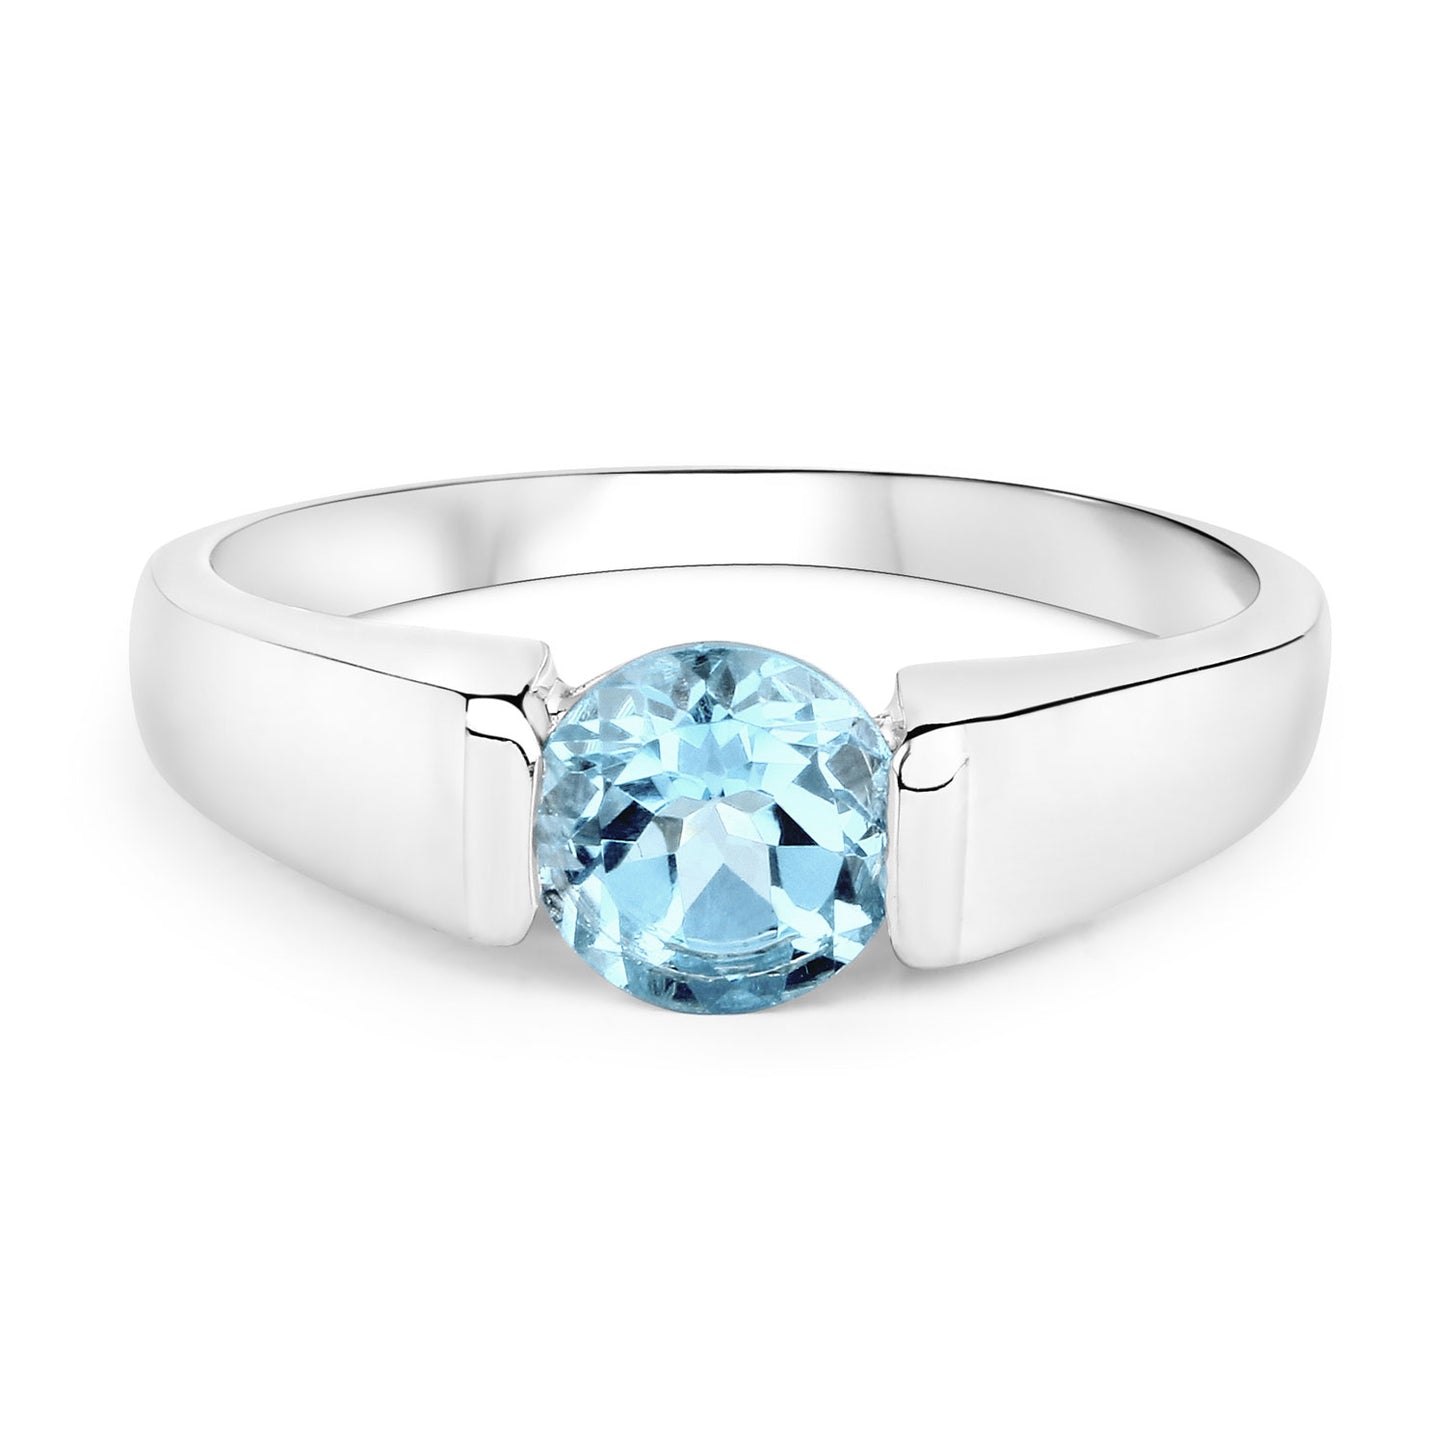 Sterling Silver 1.05 Carat Genuine Blue Topaz Solitaire Ring fine